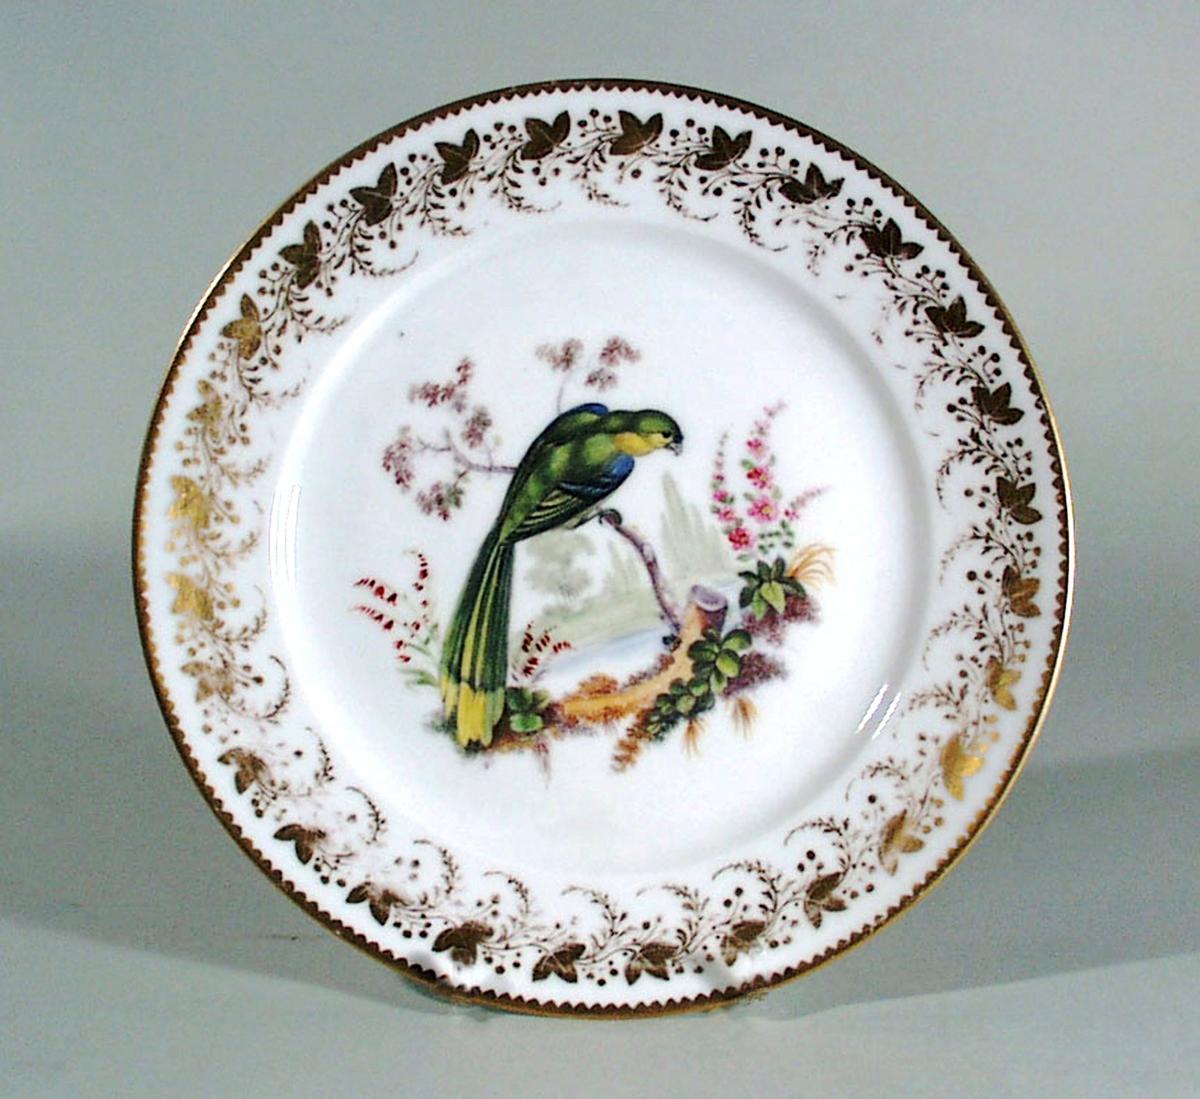 Antique London-decorated Paris Porcelain Plate,  Probably painted by Thomas Martin Randall, Circa 1815-20.